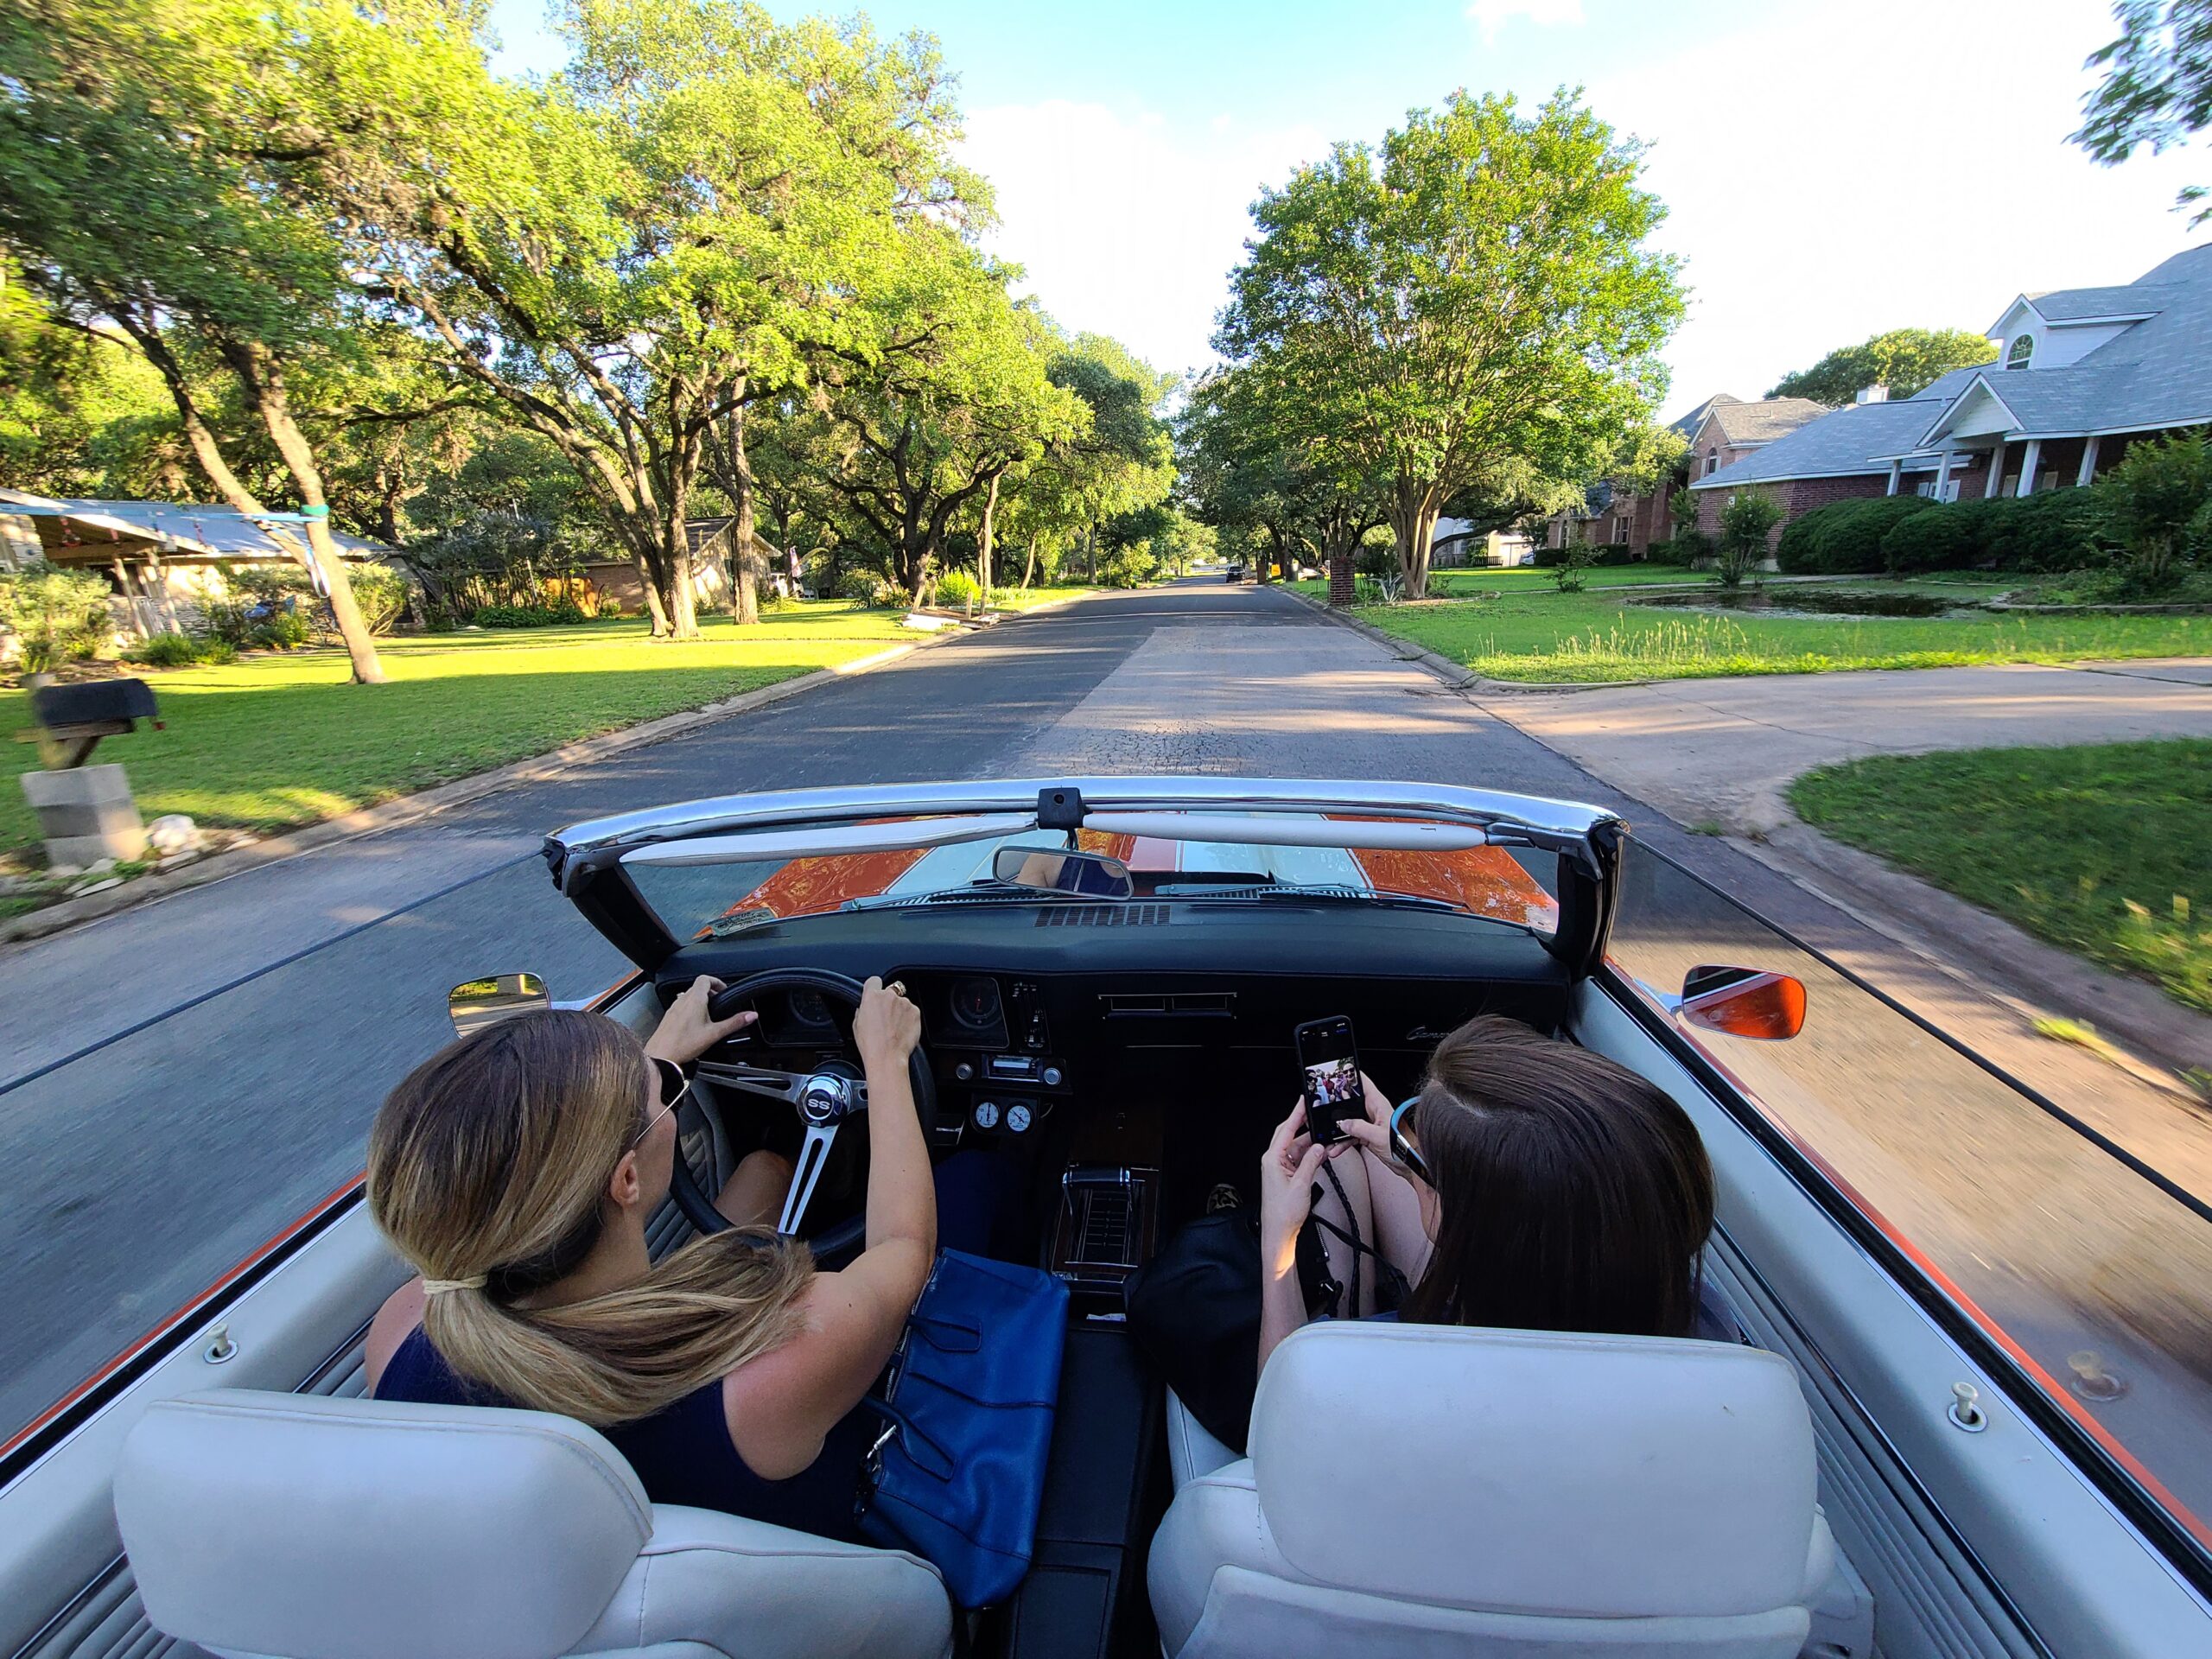 Two people are driving in a red convertible with the top down on a sunlit suburban street lined with trees and houses. The passenger is holding a camera and appears to be taking a photo.